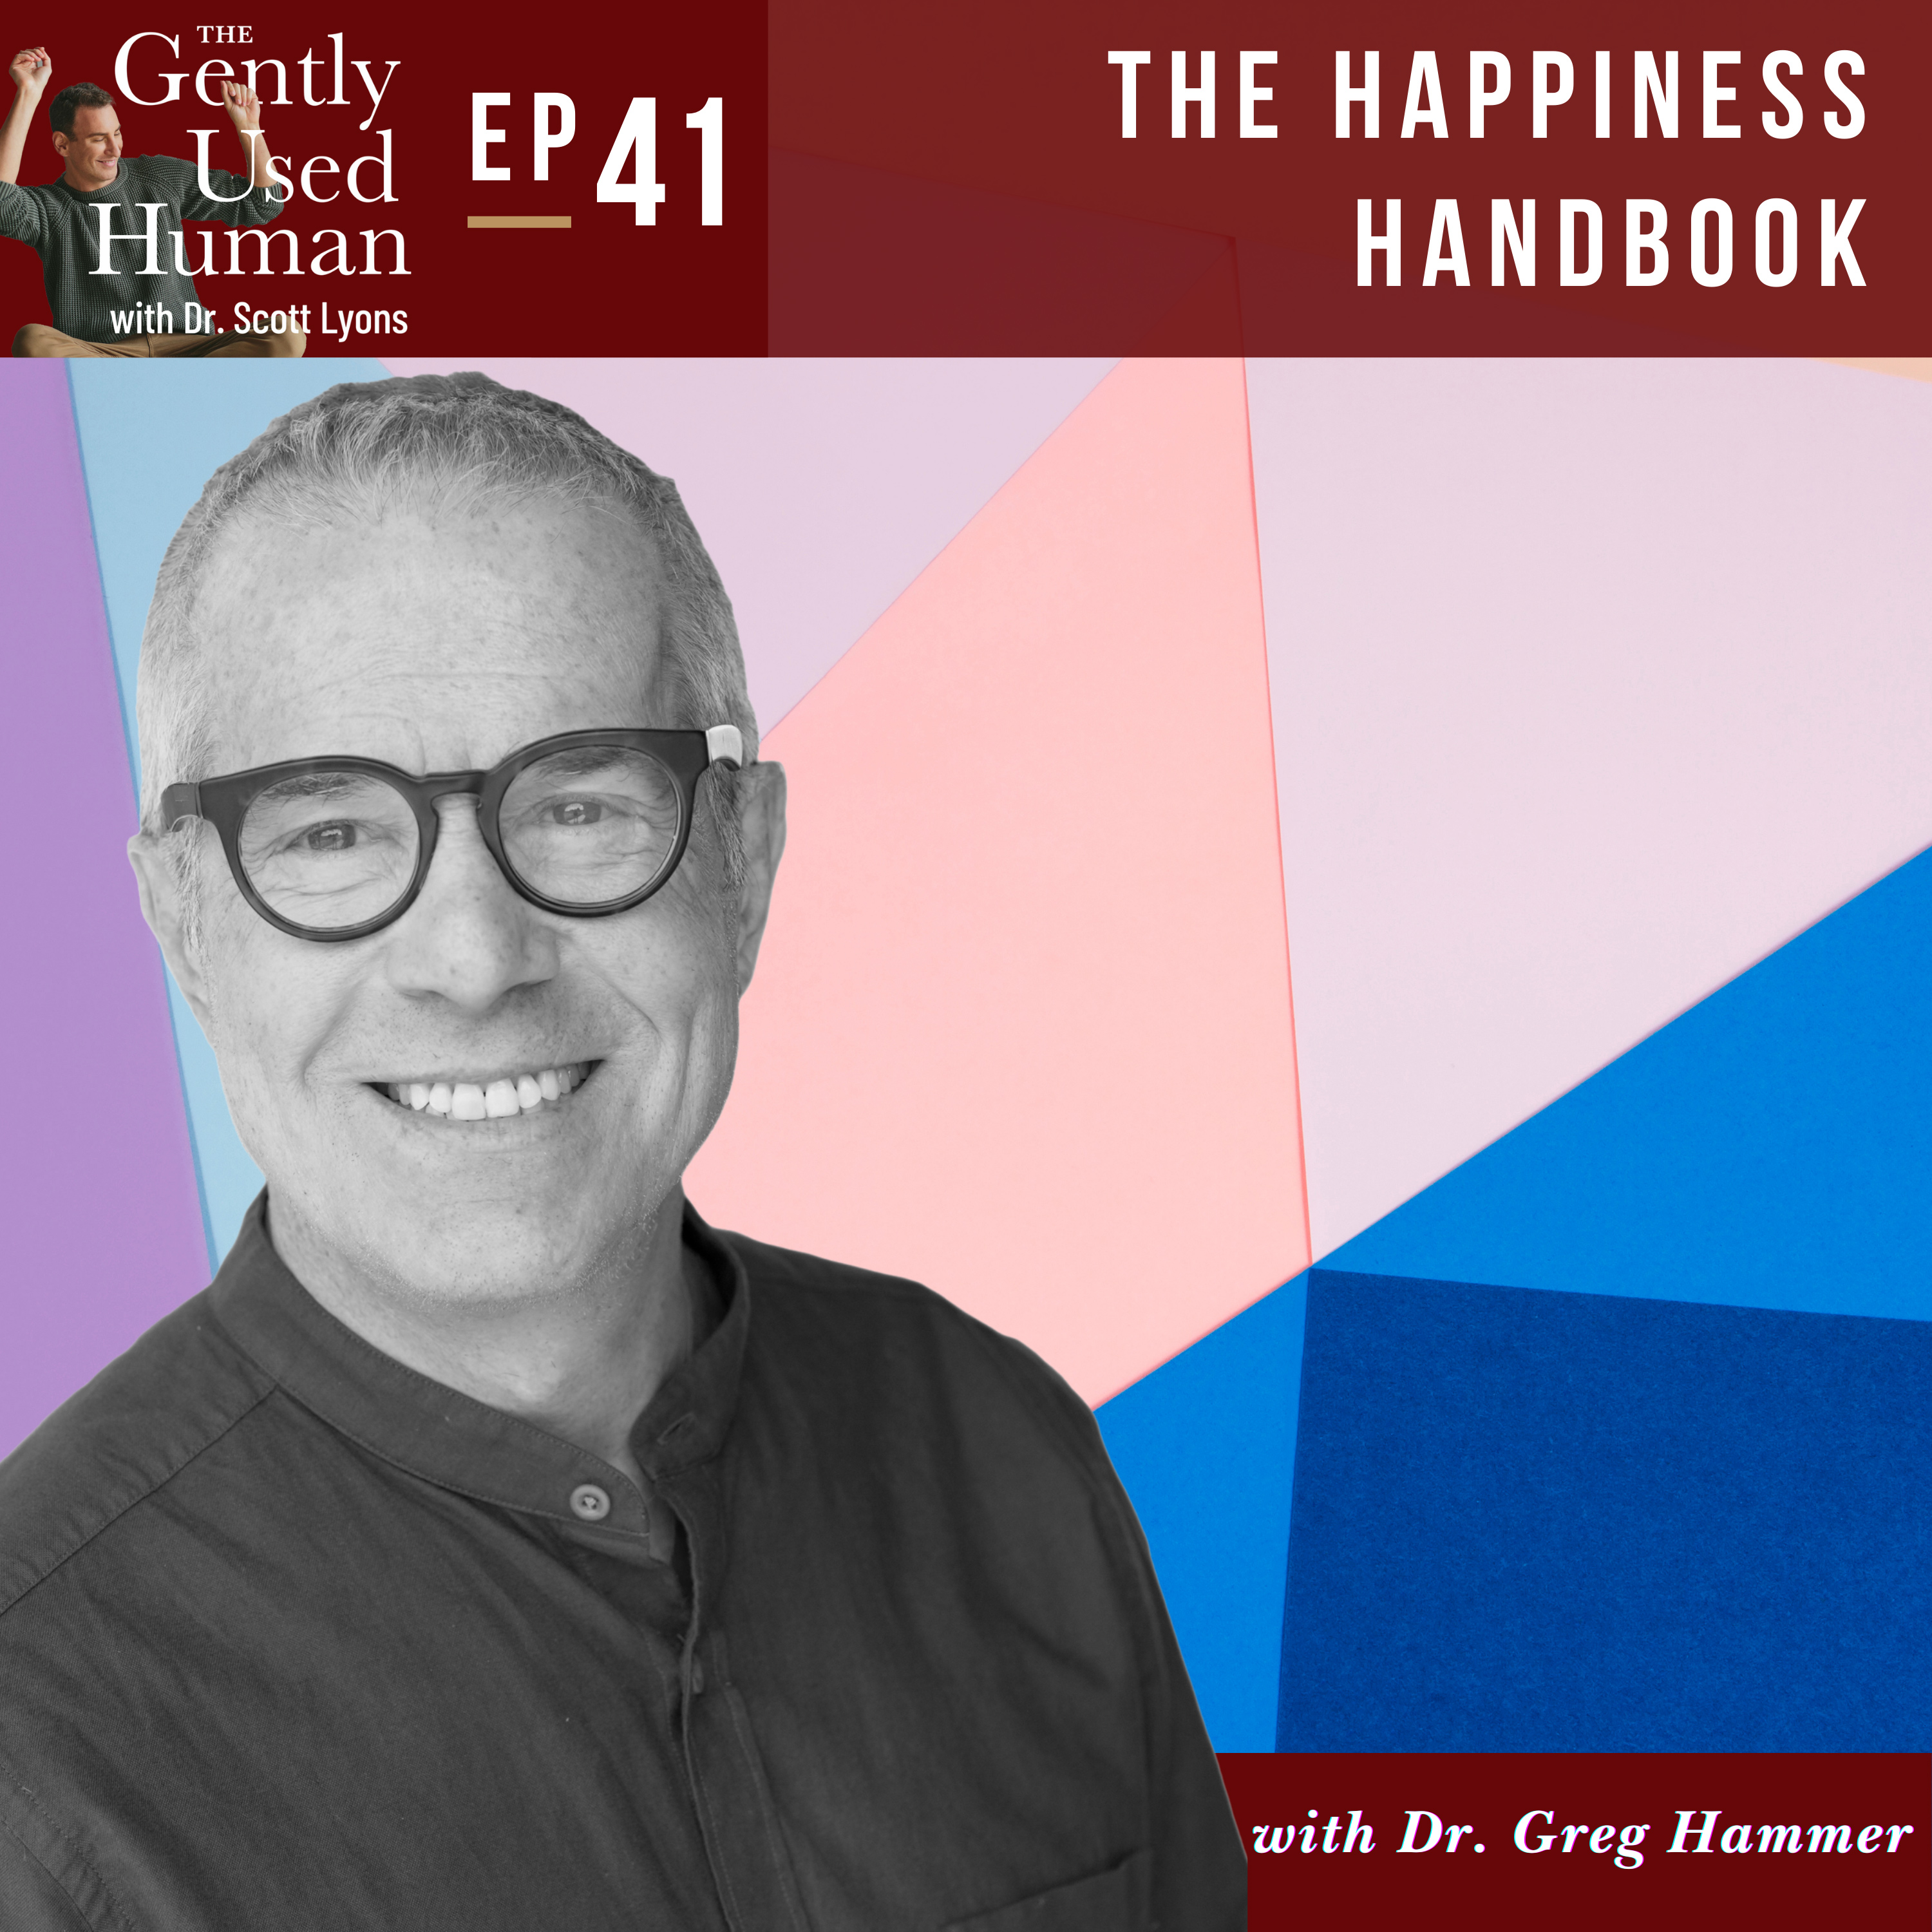 The Happiness Handbook with Dr. Greg Hammer